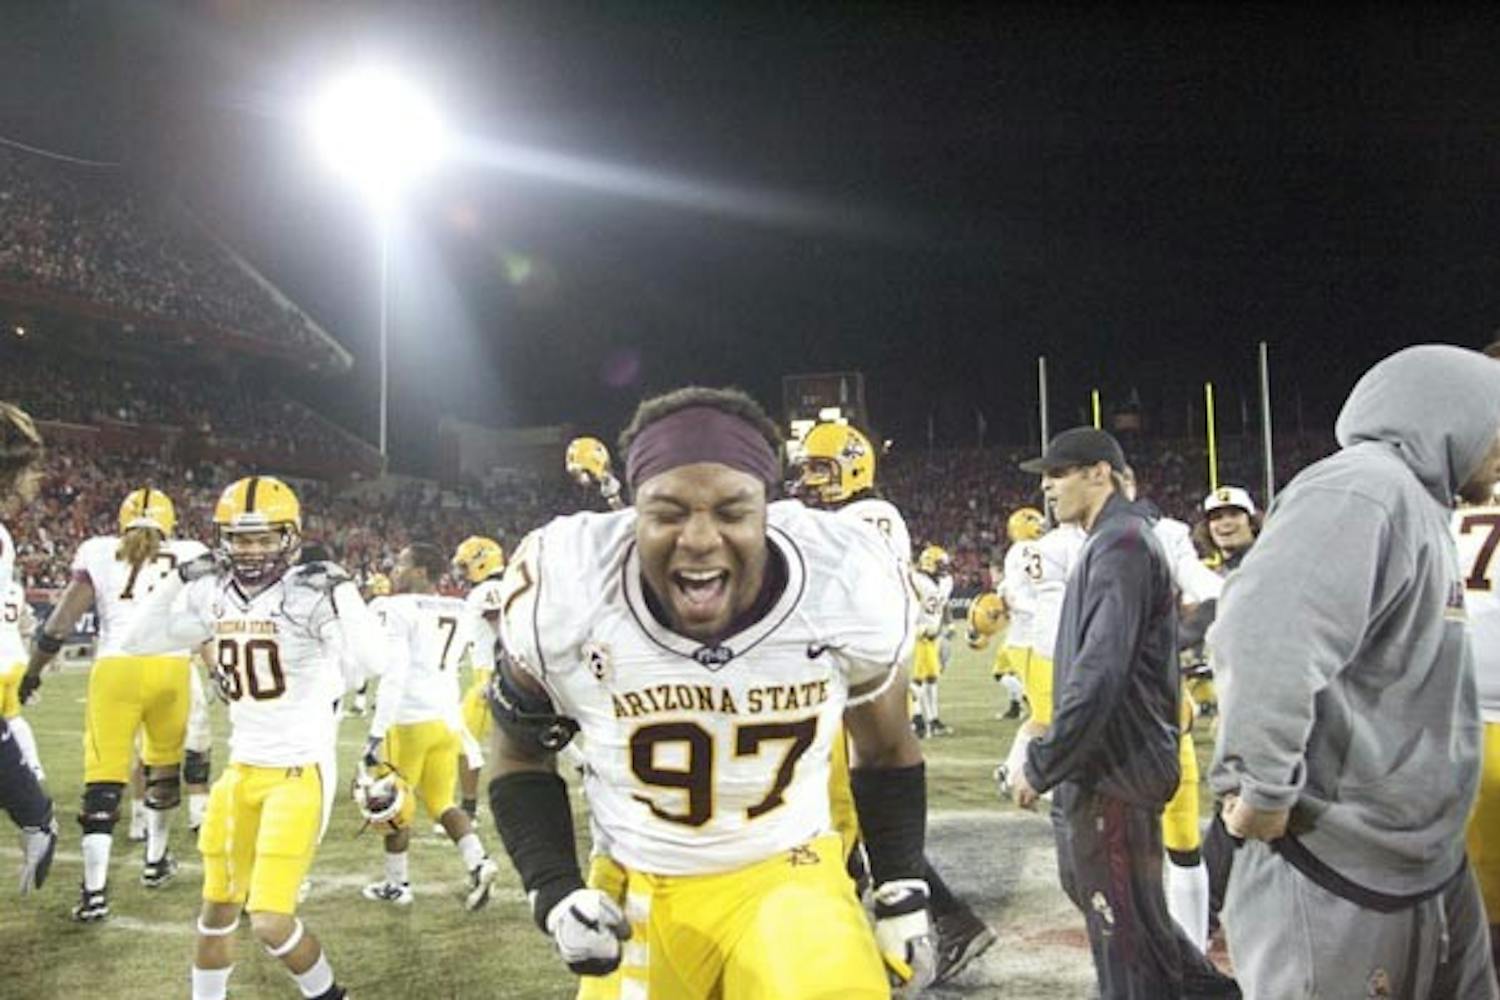 TERRITORIAL TRIUMPH: Freshman defensive end Junior Onyeali reacts to ASU's 30-29 Territorial Cup win over UA on Thursday night. The Sun Devils won the game in double overtime after a blocked extra point attempt. (Photo by Scott Stuk)